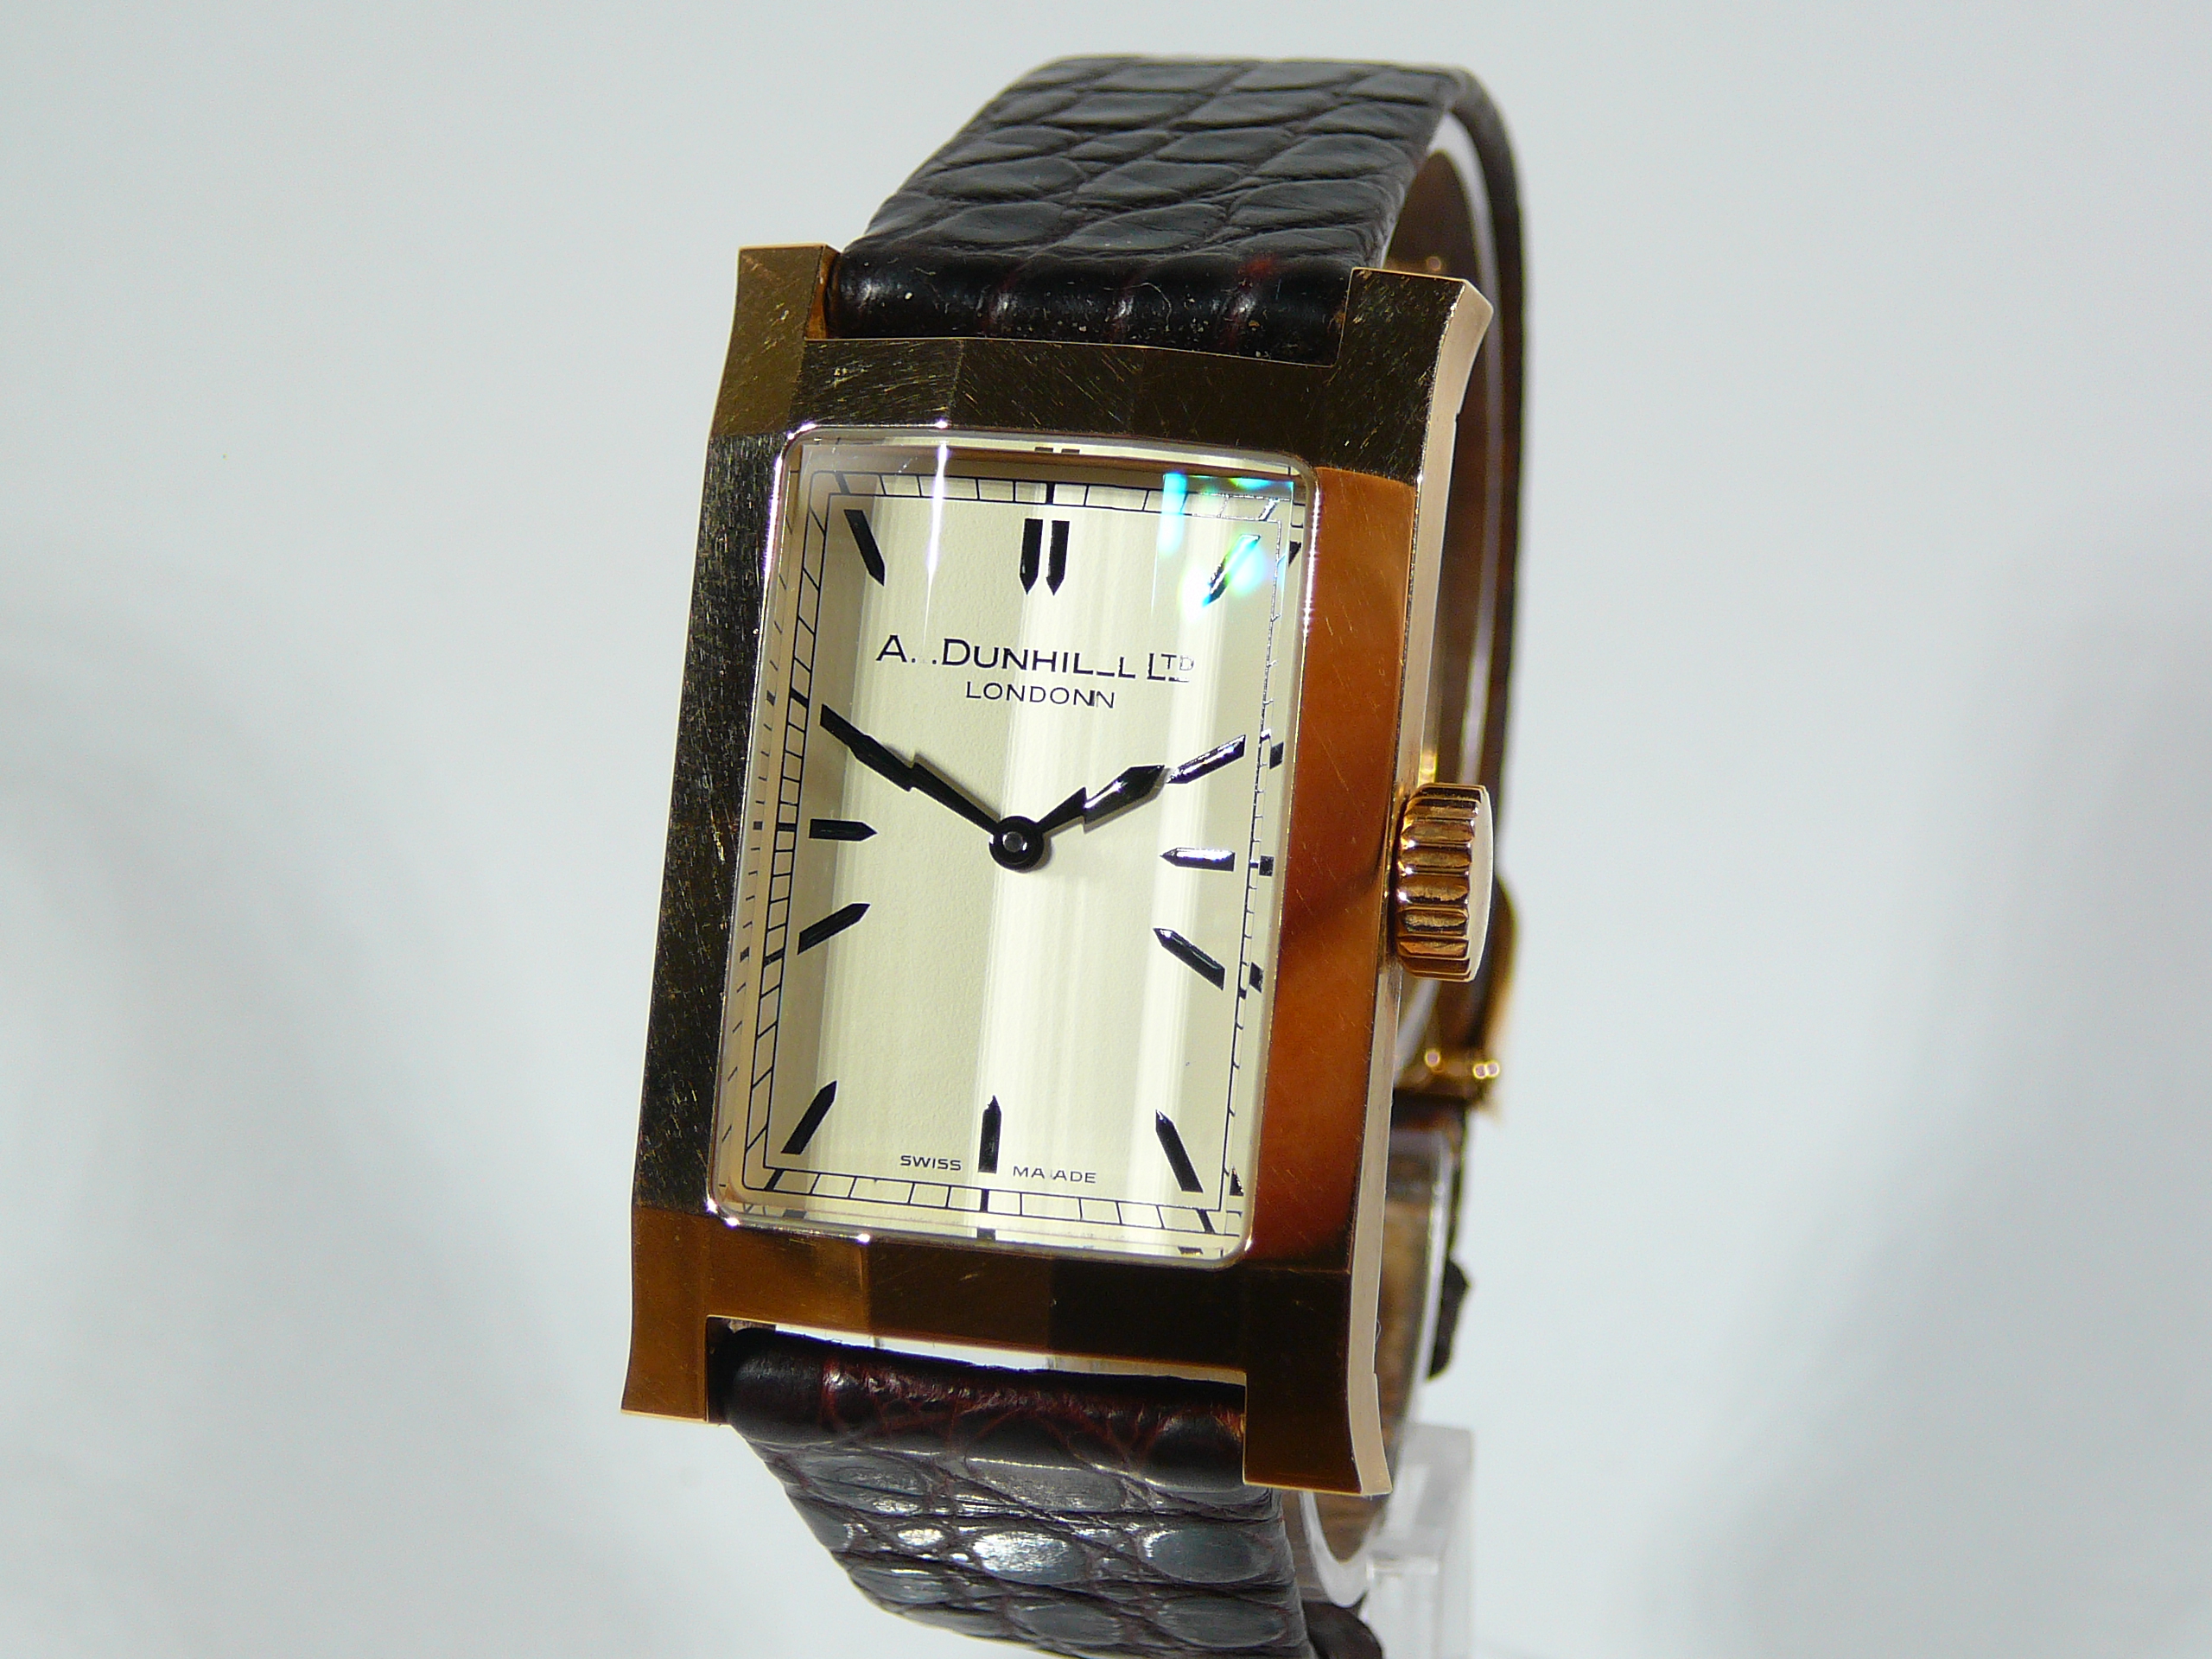 Gents Dunhill Gold Wrist Watch - Image 2 of 3